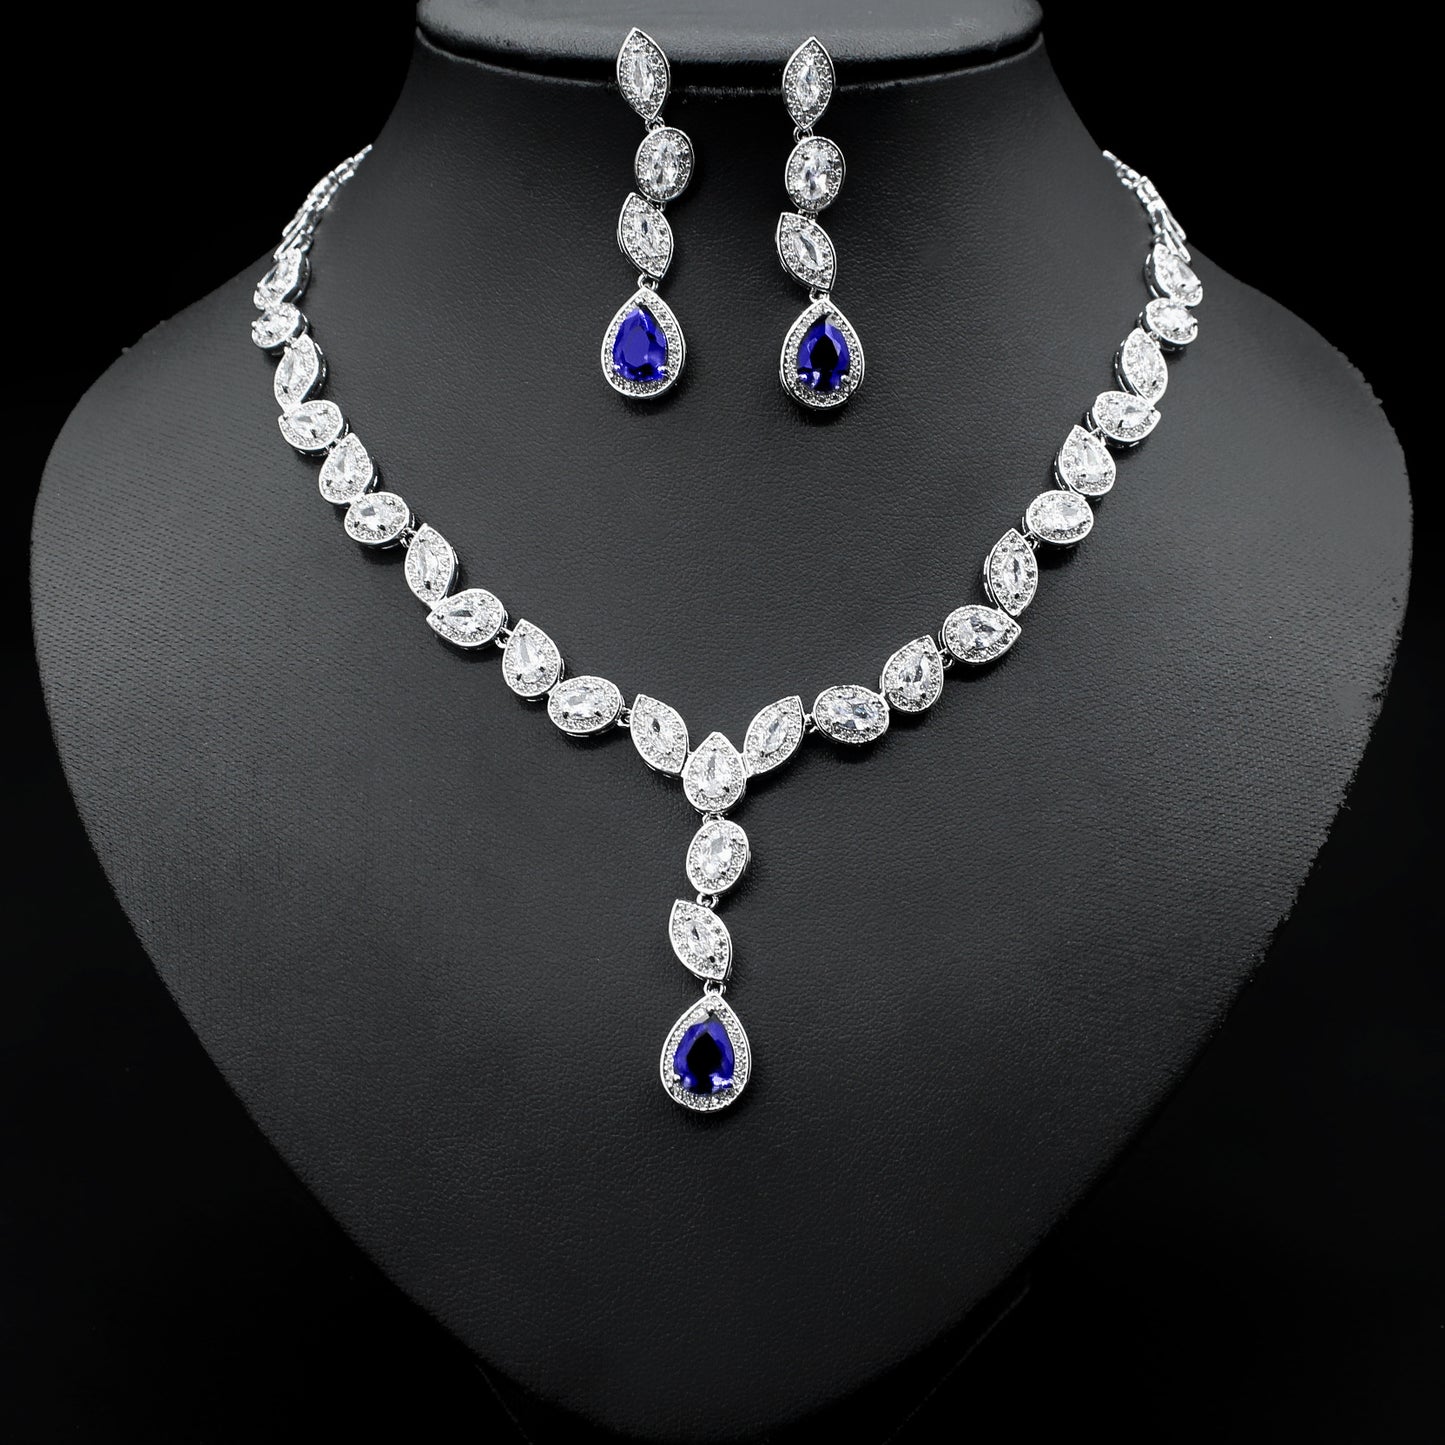 Colorful Zircon Necklace Earrings Clavicle Chain Female Noble Luxury Wedding Dress Three-piece Set